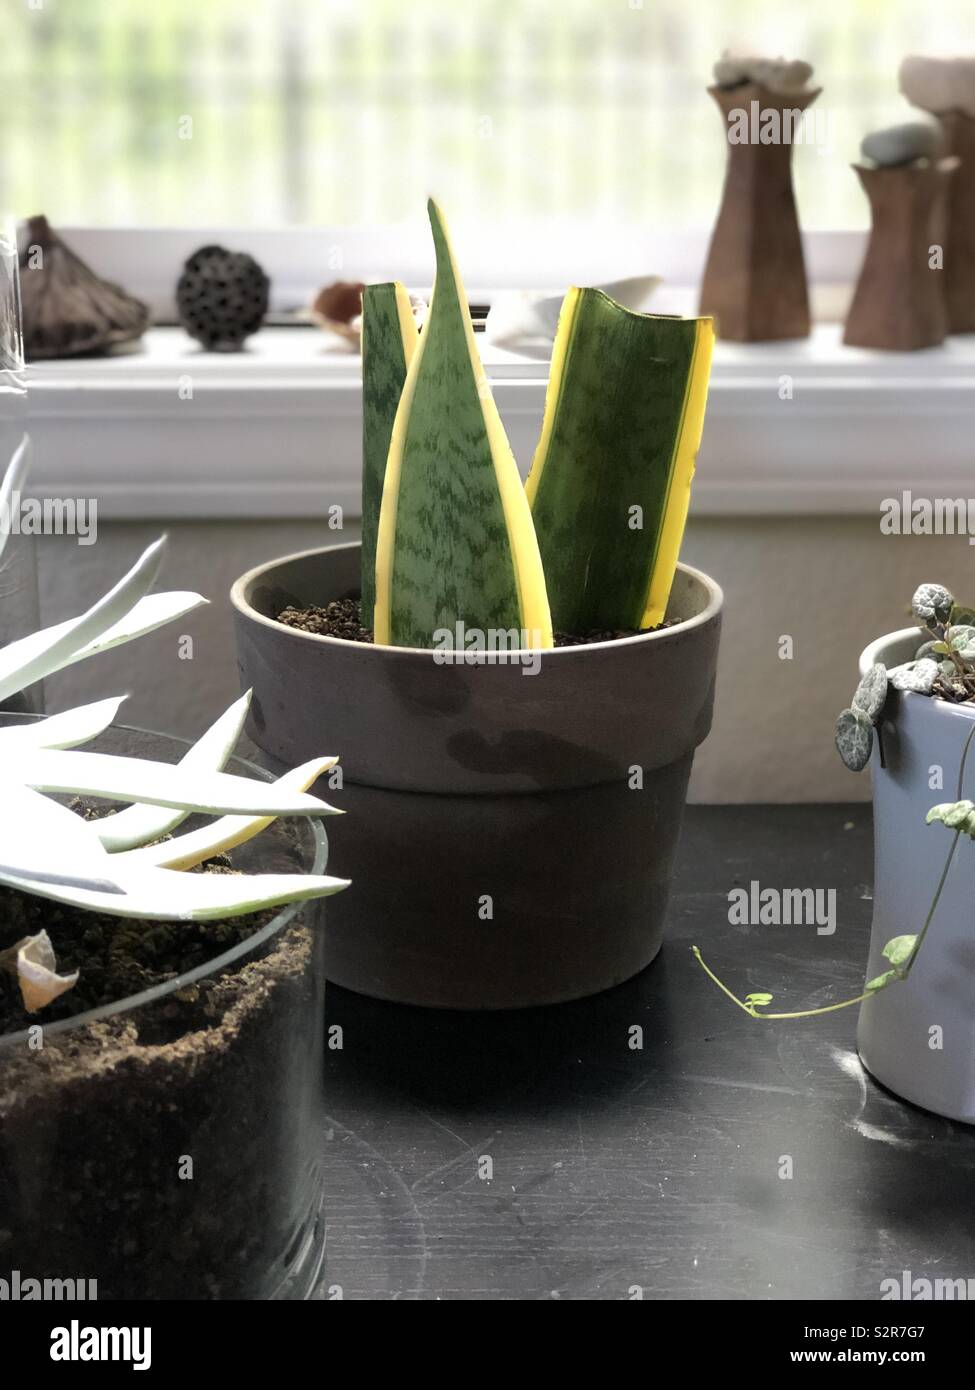 Cuttings from a snake plant in a pot. Stock Photo